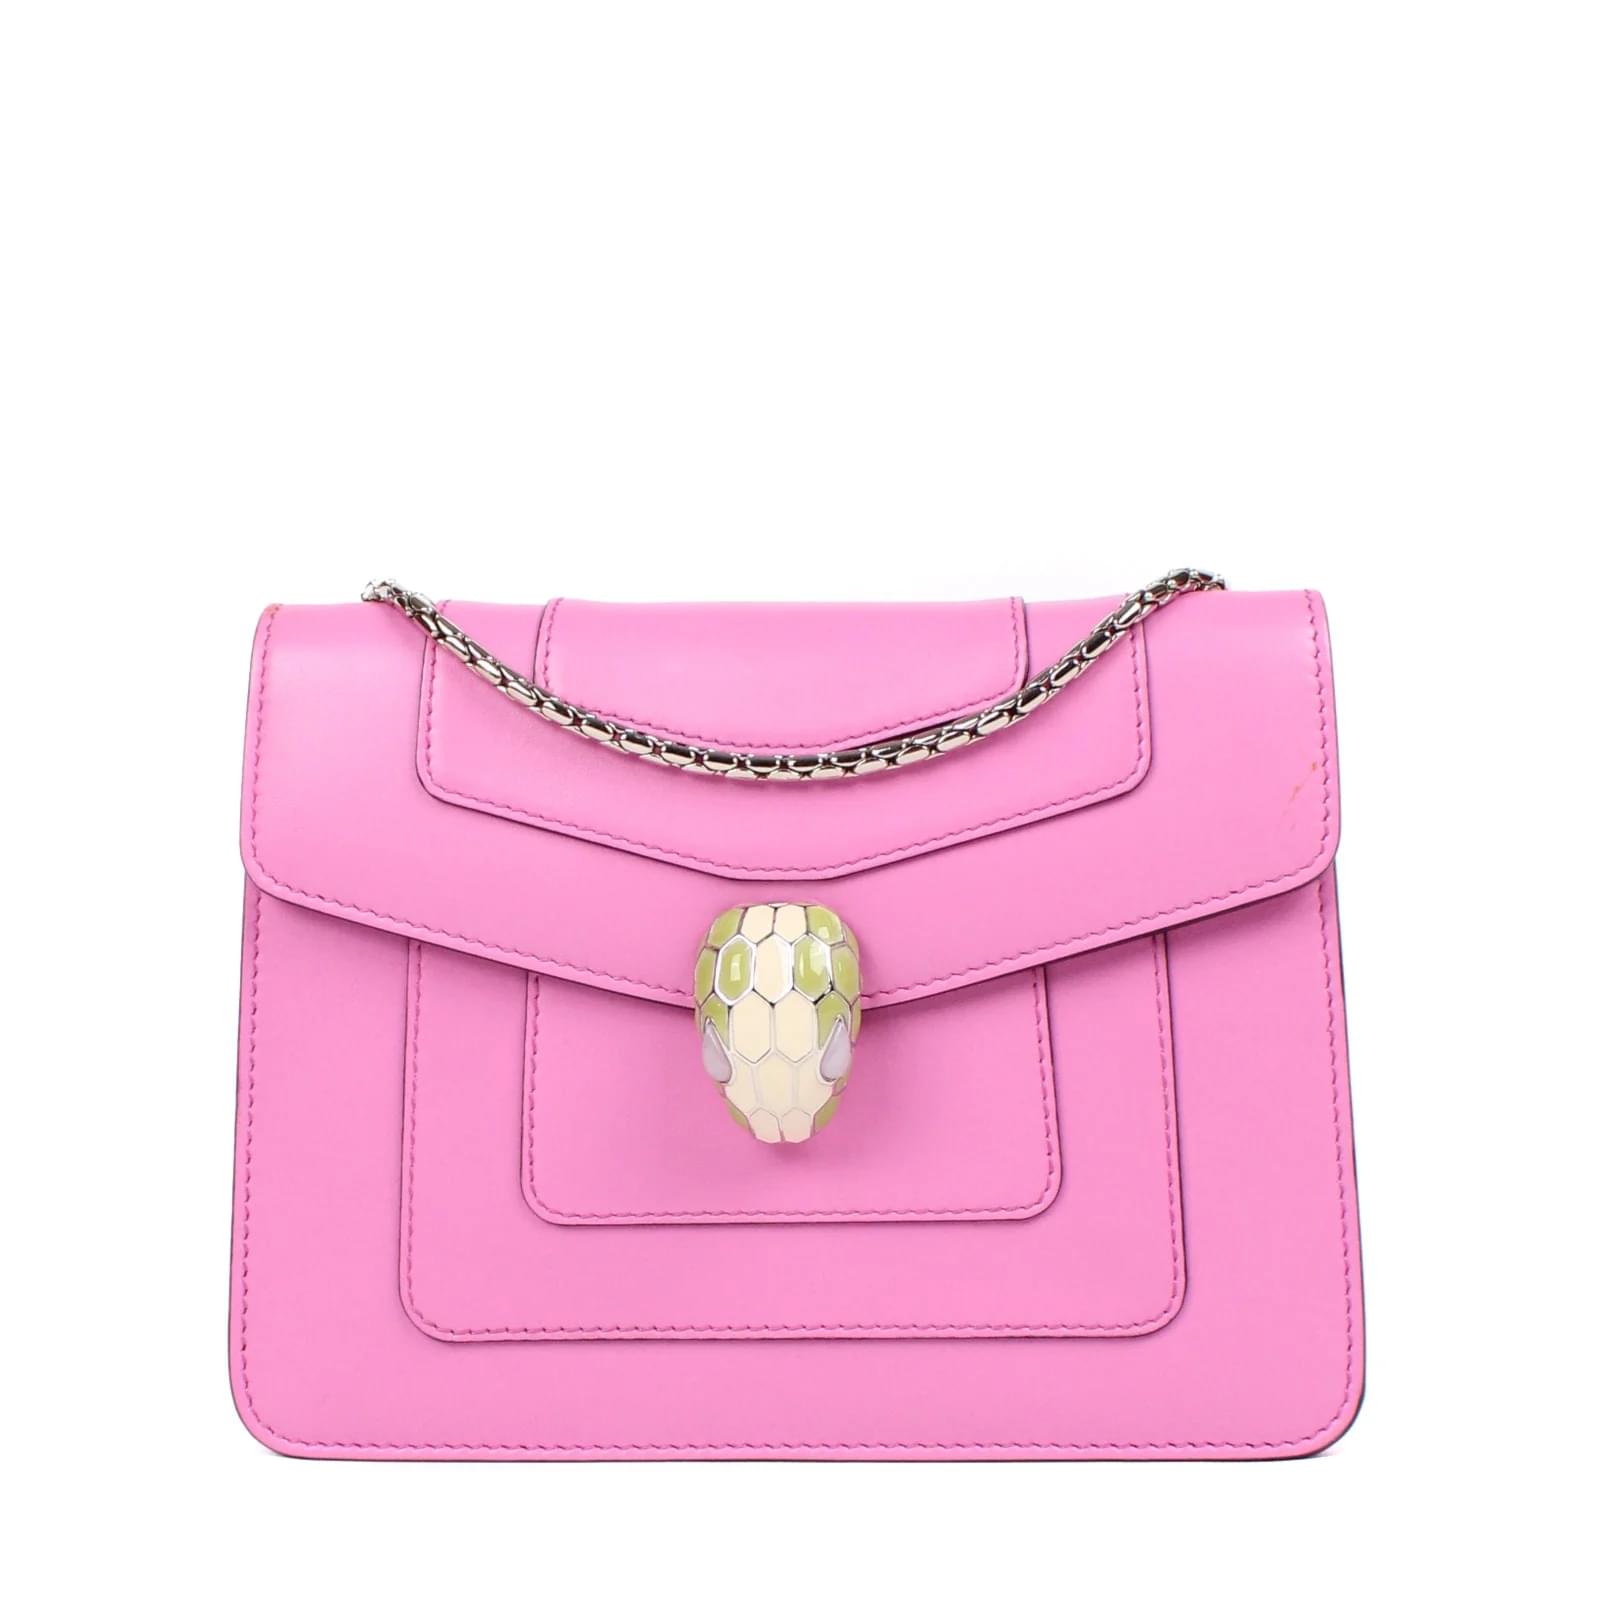 BVLGARI Serpenti Forever Leather Cross-Body Bag in Pink